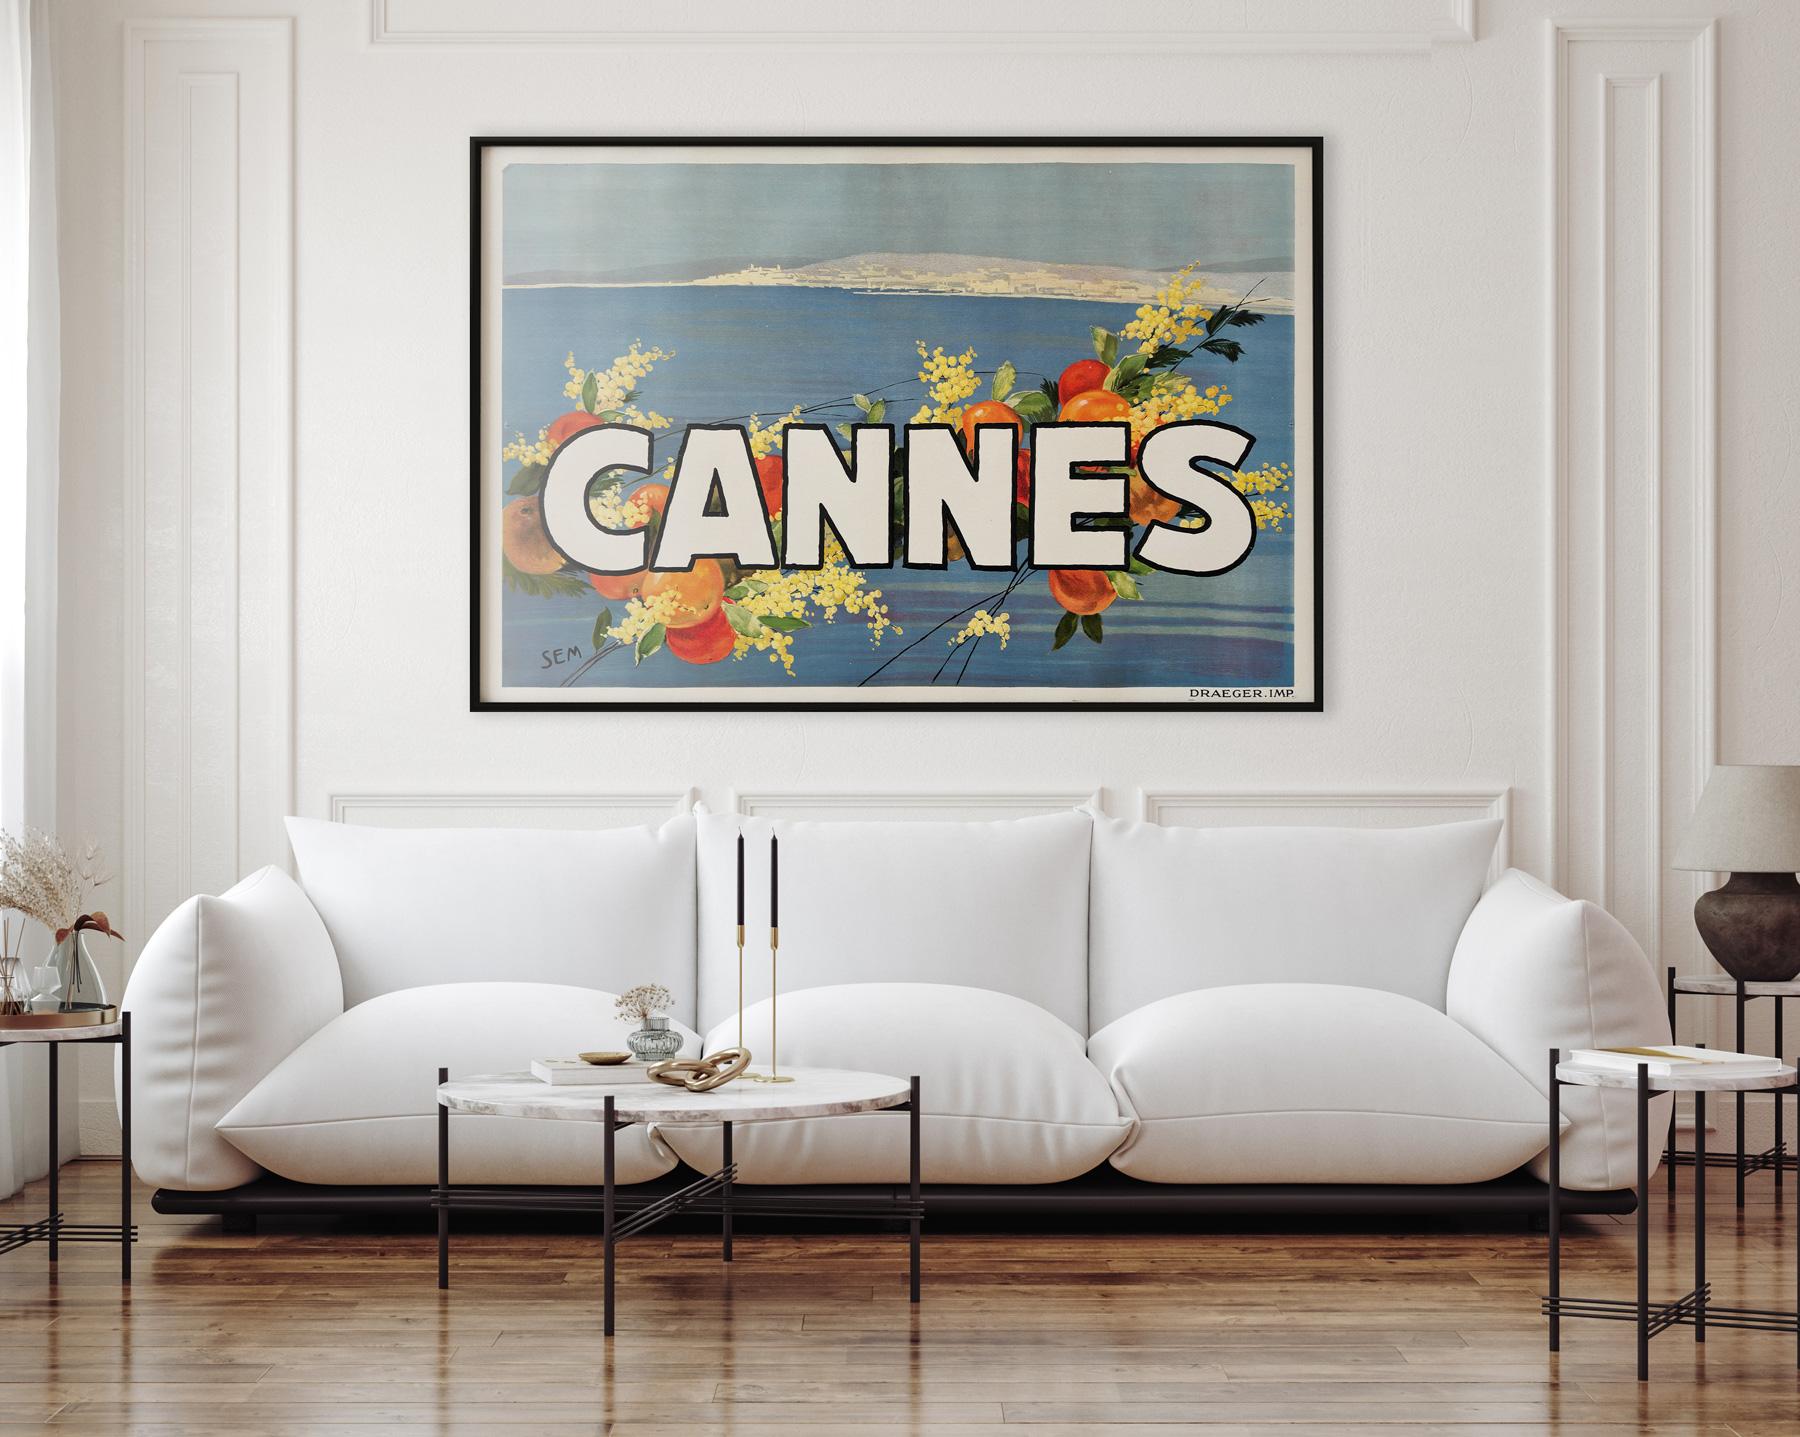 Beautiful original 1930s Cannes Travel Advertising poster designed by George Goursat (SEM). 

In fantastic Near Mint/Mint linen-backed condition.

This original vintage movie poster has been professionally linen-backed is sized an impressive 46 3/4